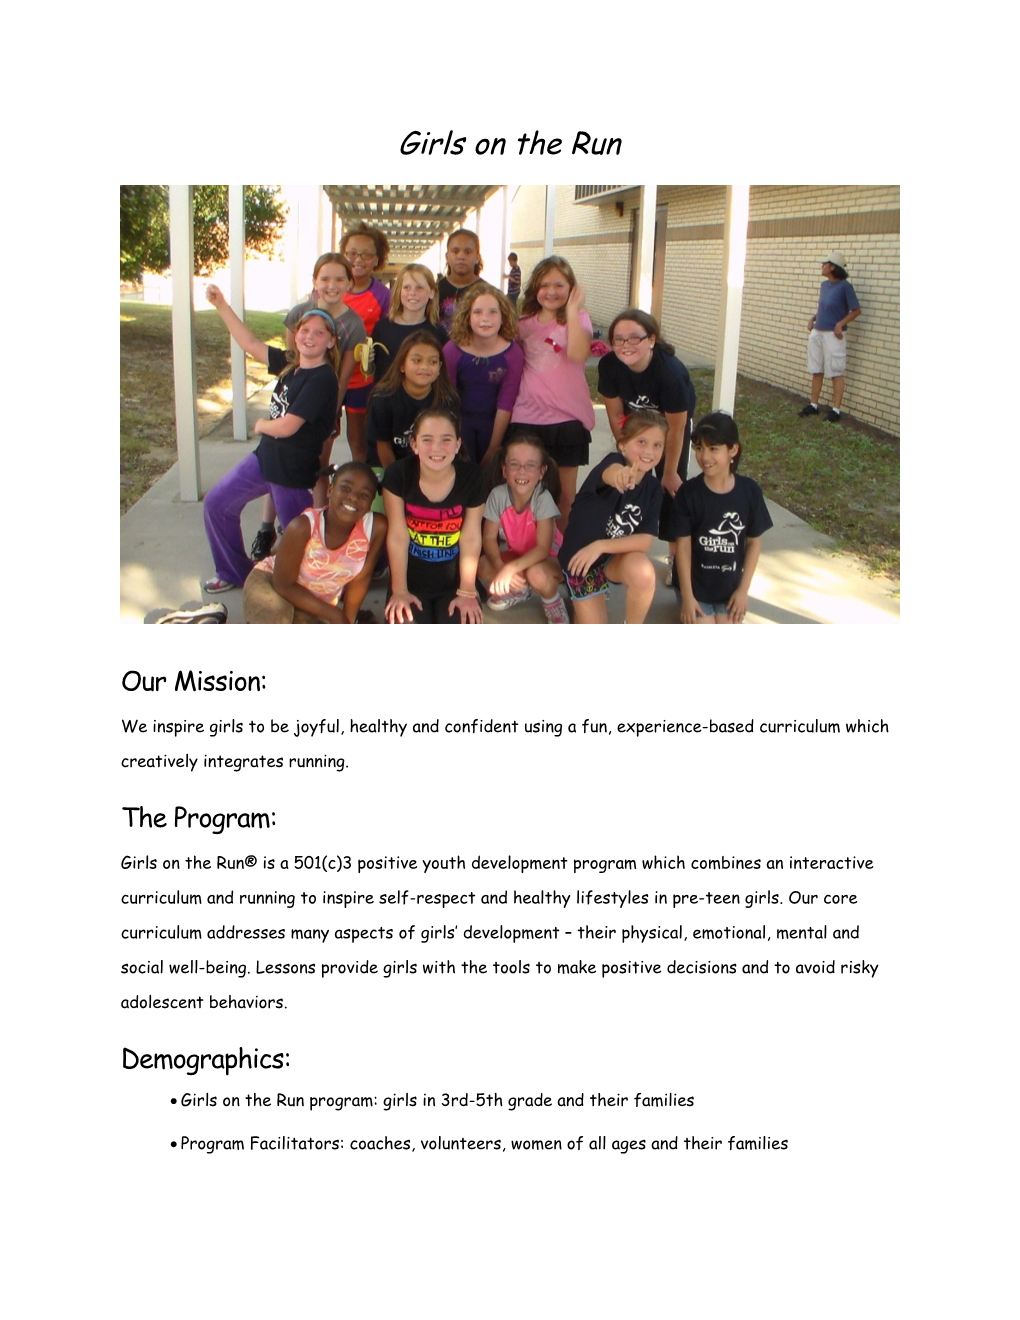 Girls on the Run Program: Girls in 3Rd-5Th Grade and Their Families